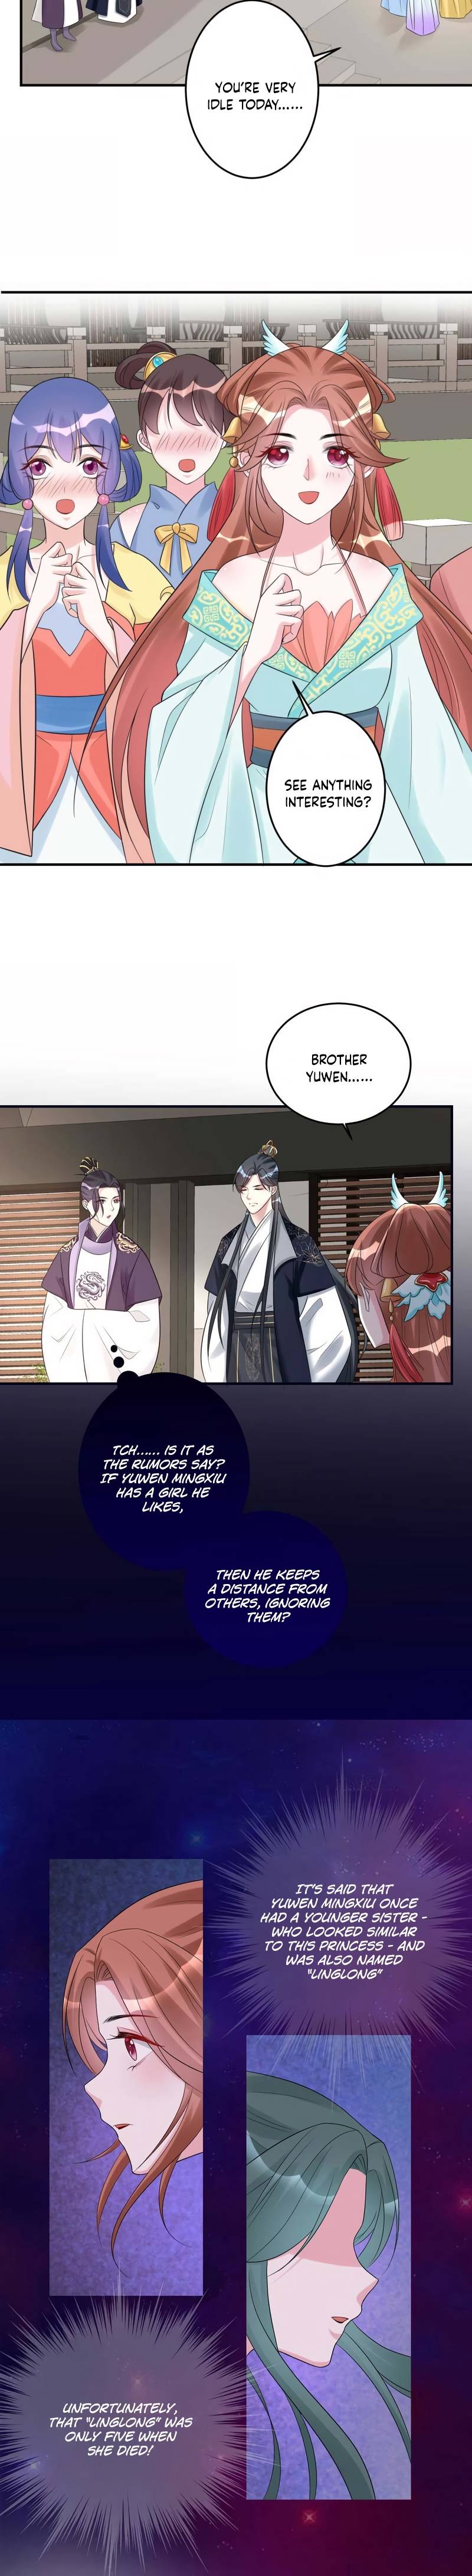 Poisonous Doctor: First Wife’s Daughter chapter 68 page 4